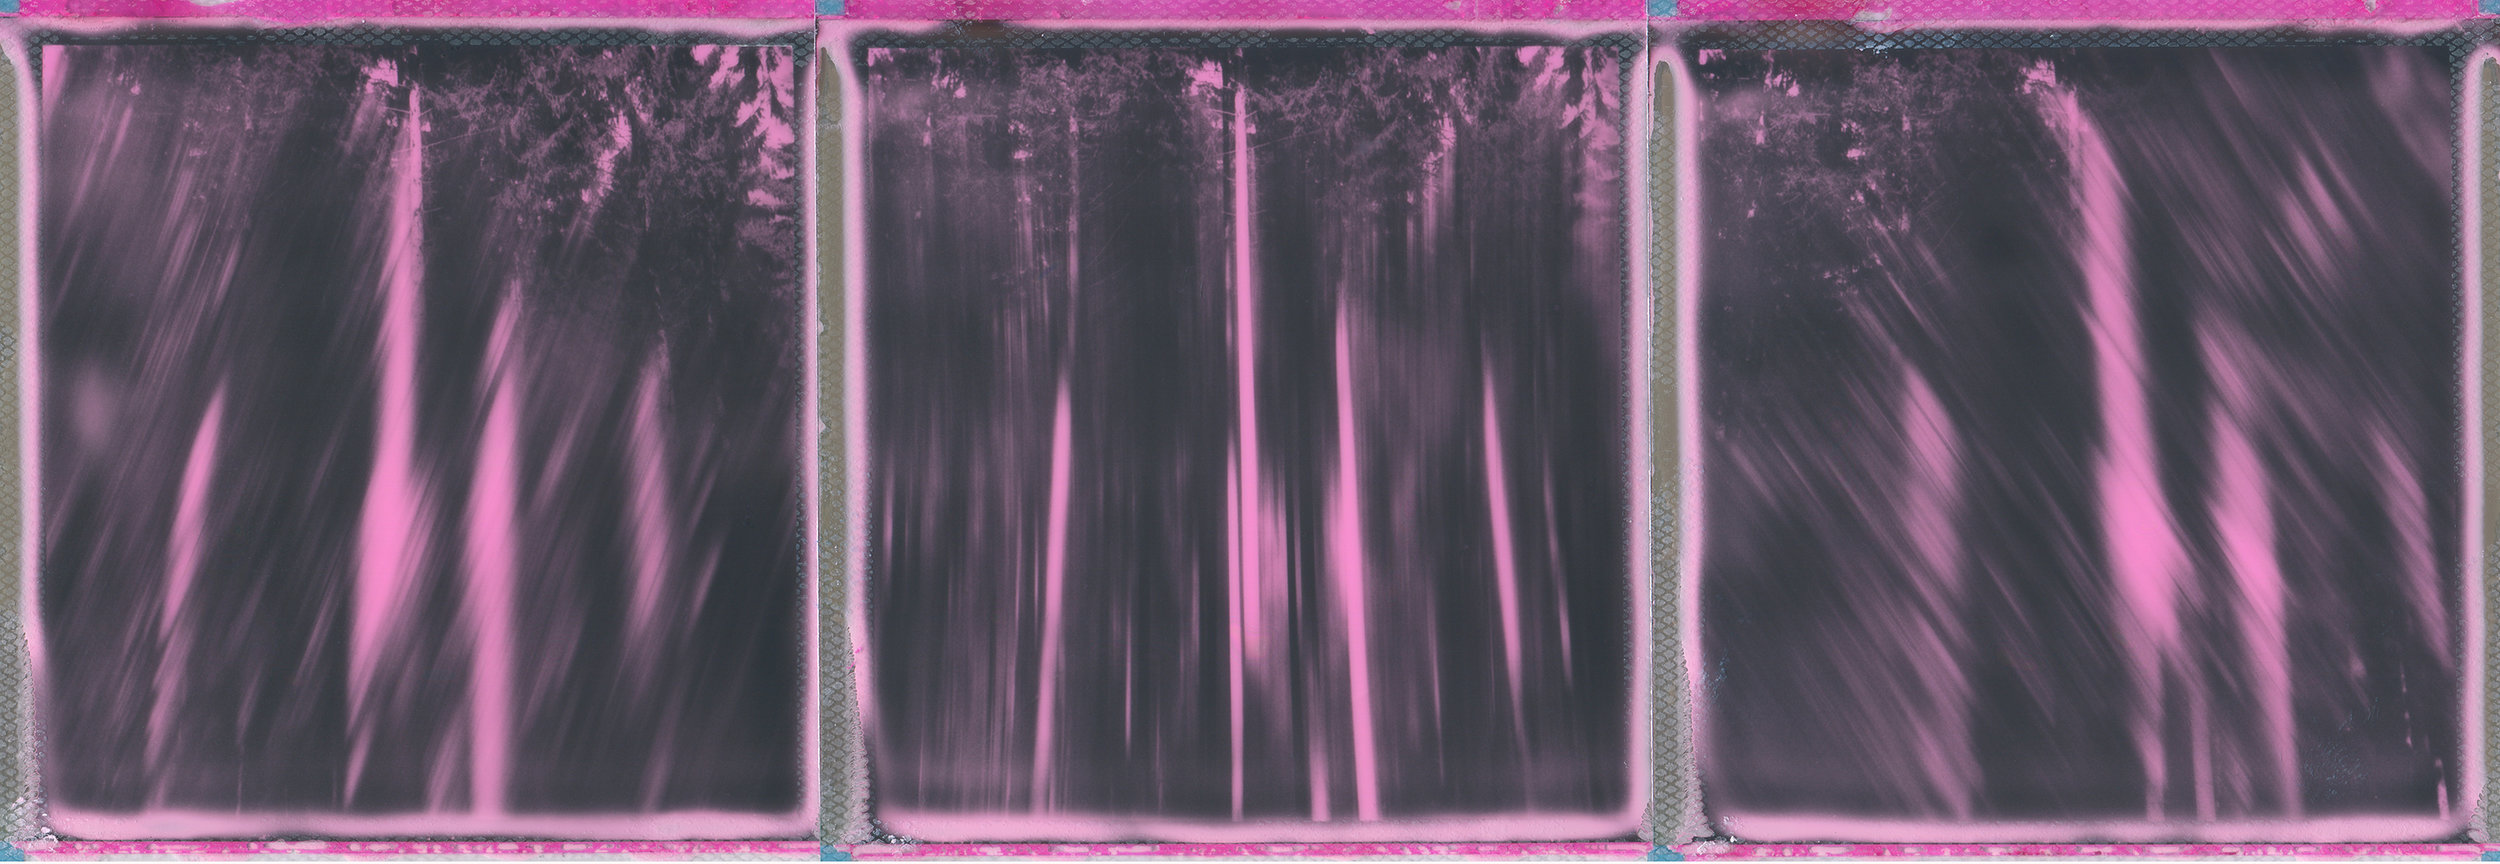 Me, Abstracted | Polaroid SX70 (Converted) | Impossible Project Black & Pink Duochrome | A Triptych | Ina Echternach